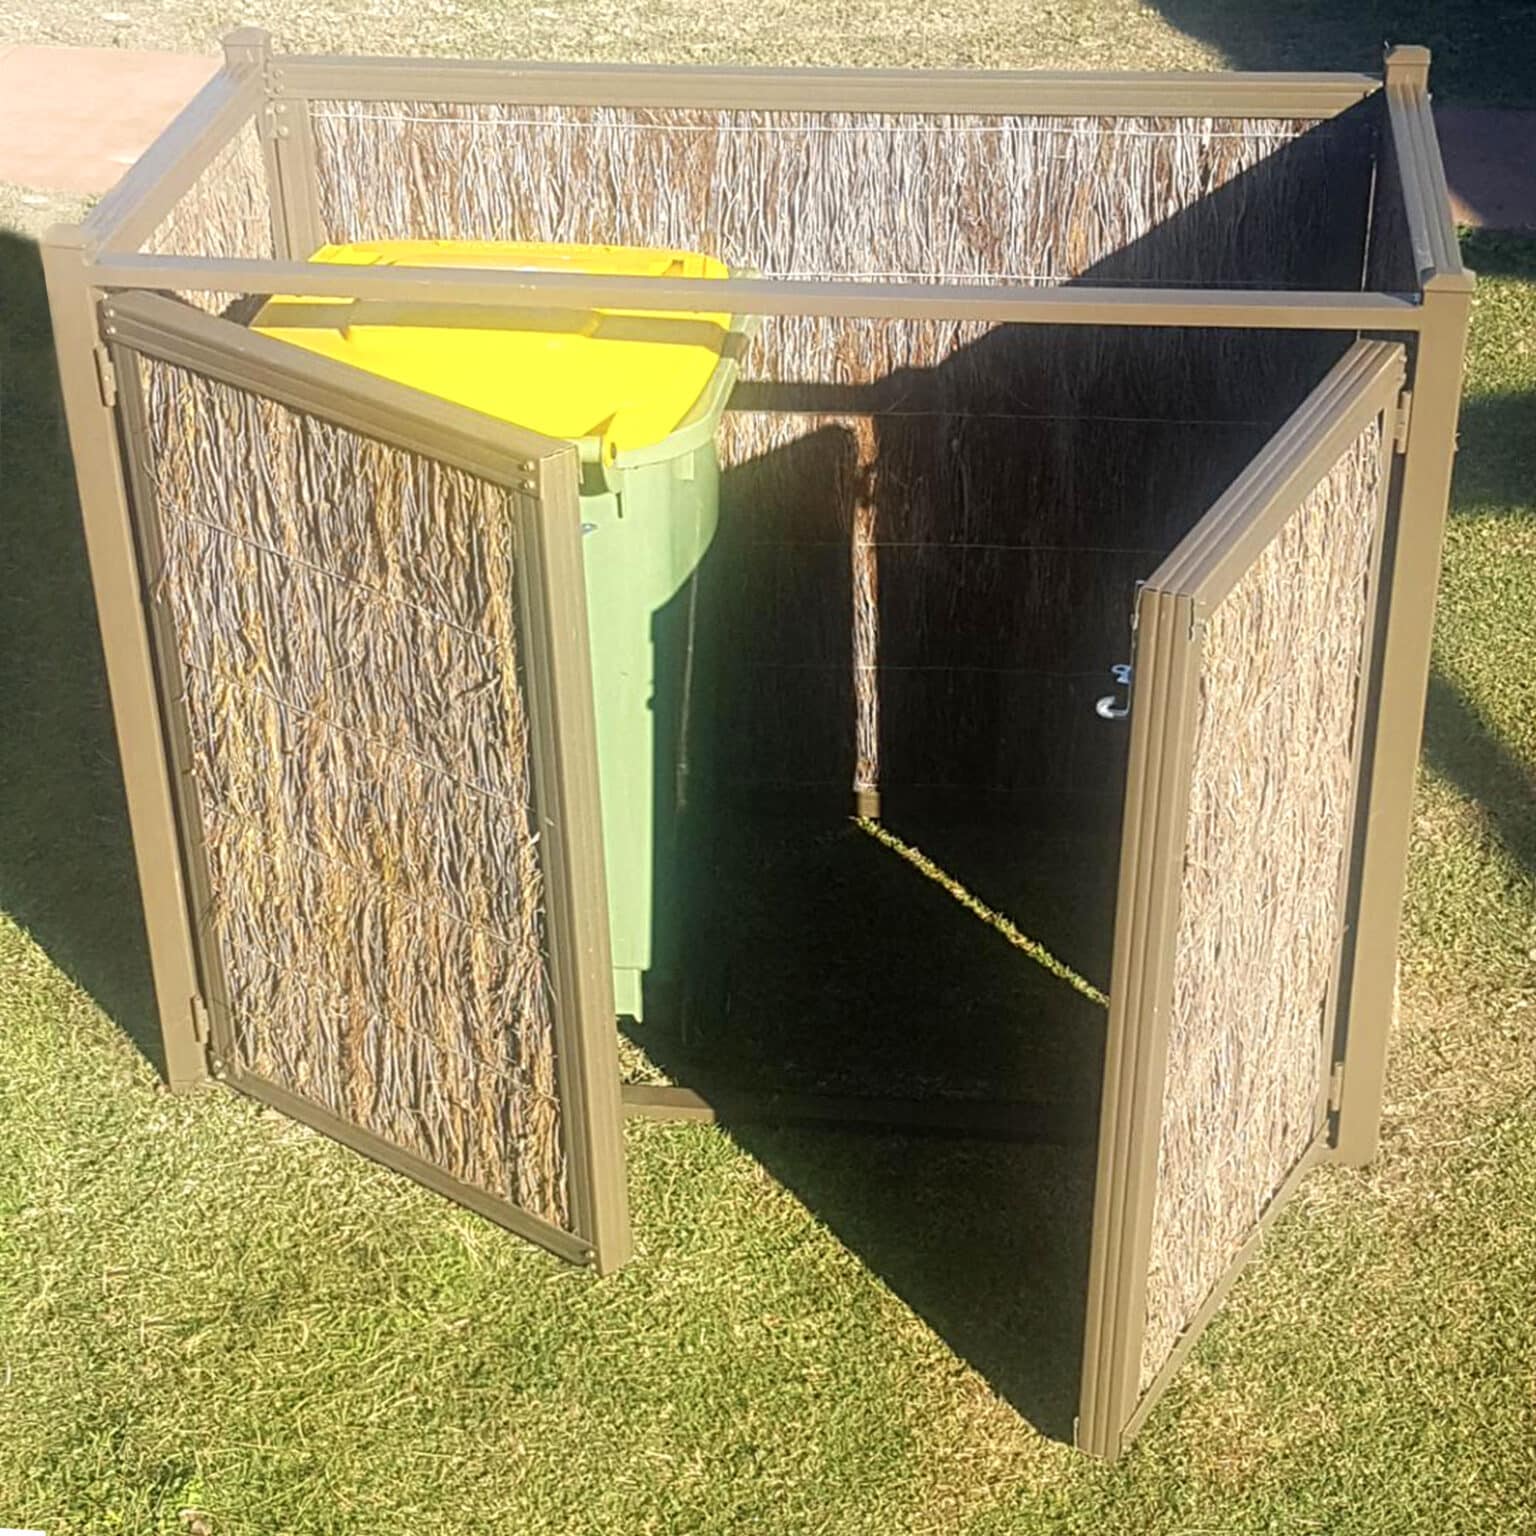 Neat and sturdy brushwood bin enclosure with the door open showing the bins